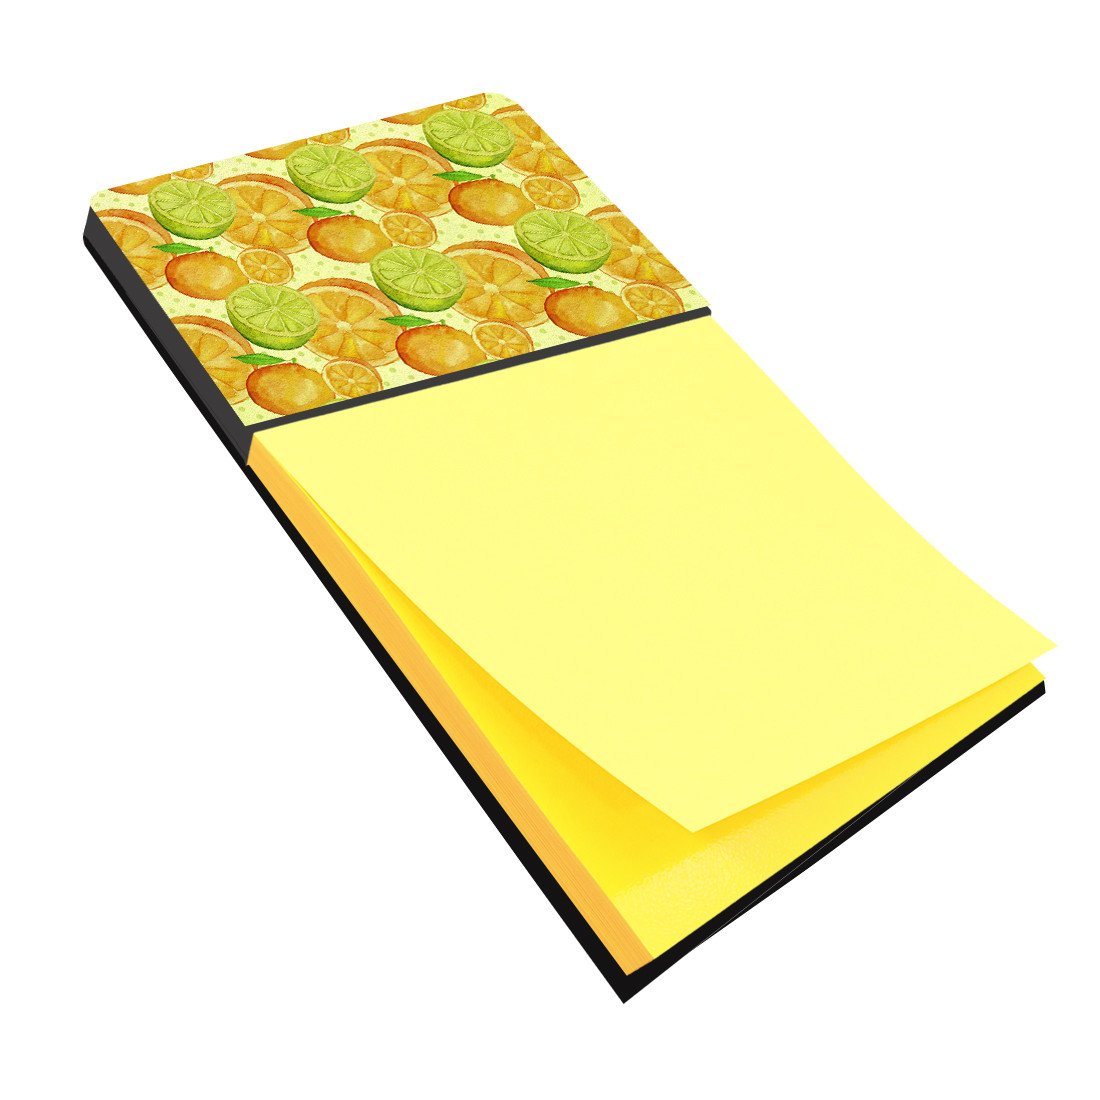 Watercolor Limes and Oranges Citrus Sticky Note Holder BB7517SN by Caroline's Treasures